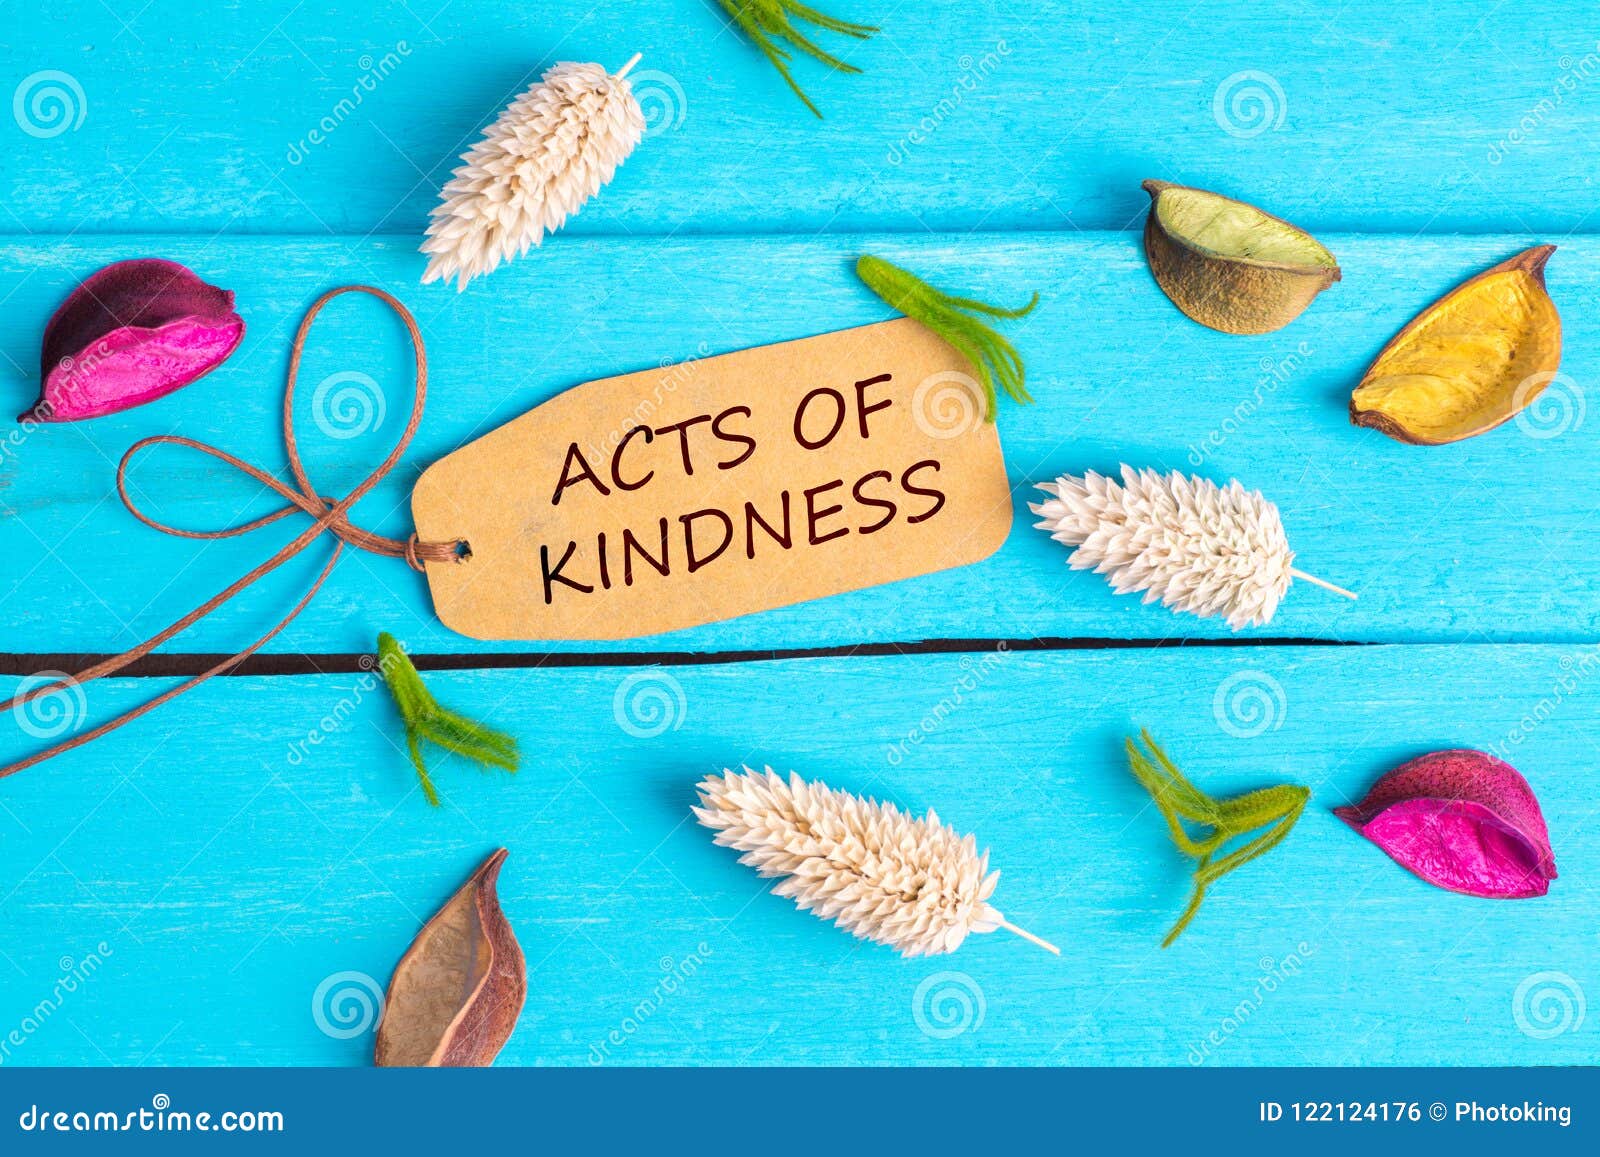 acts of kindness text on paper tag